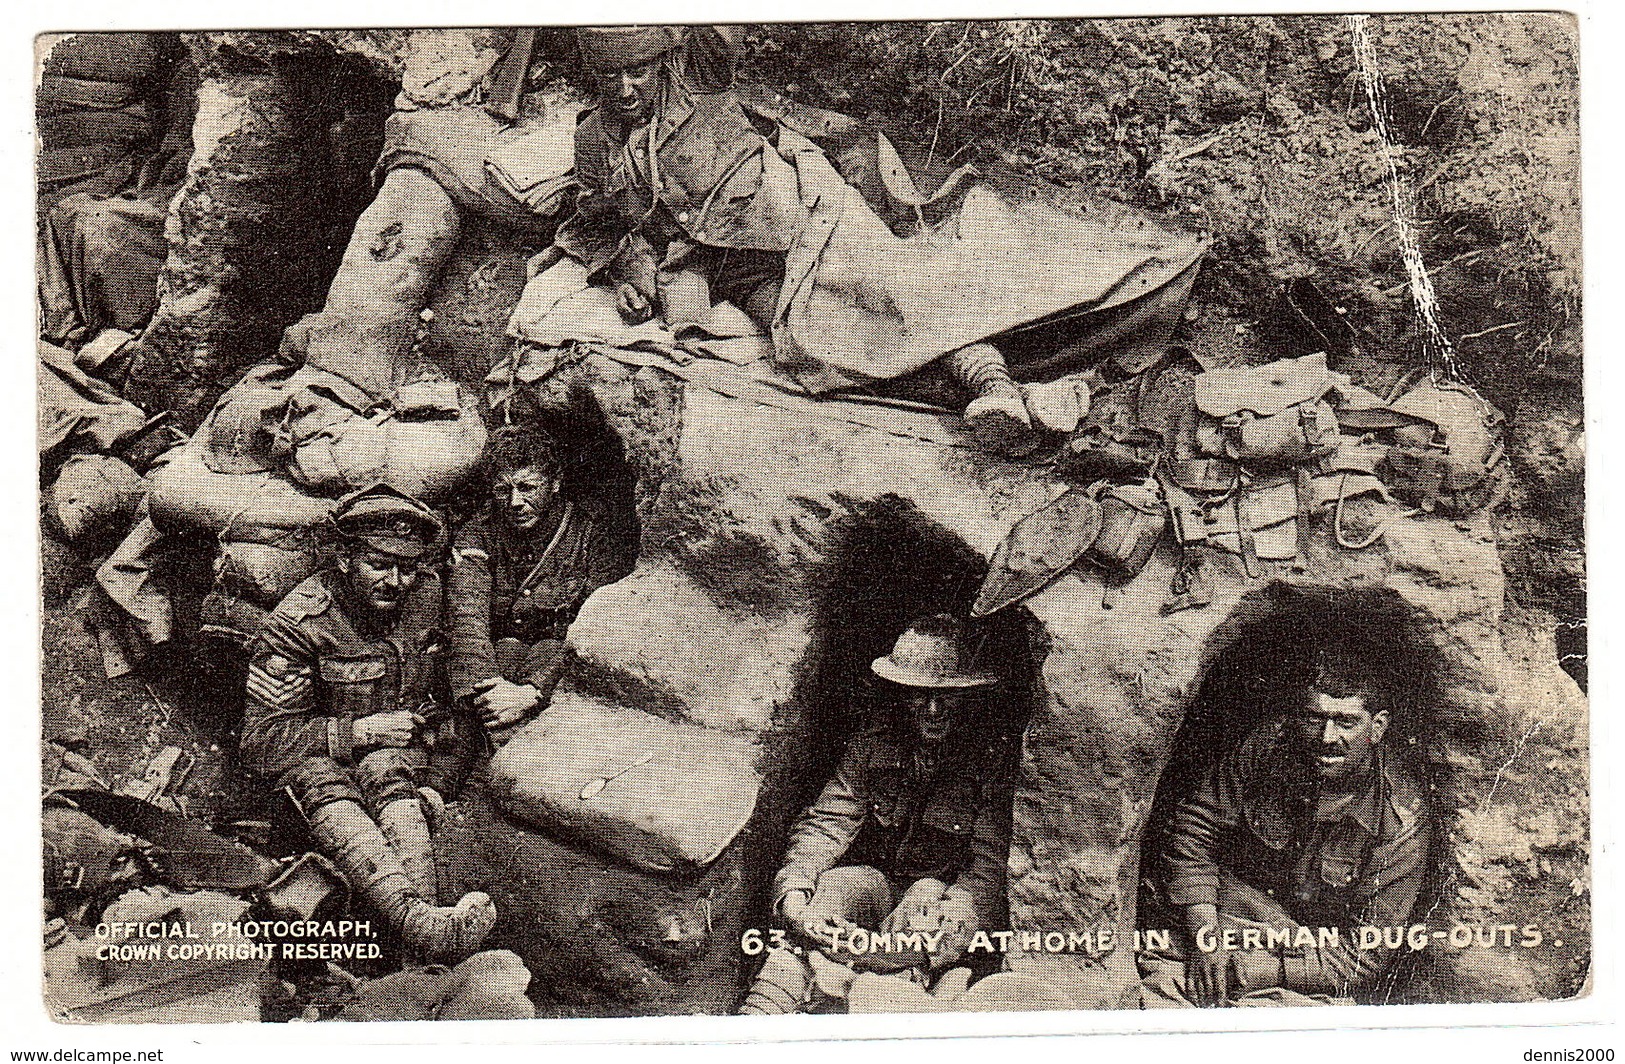 MILITARIA - 1914-1918 - TOMMY AT HOME IN GERMAN DUG-OUTS" - Ed. Official War Photographs, Series VIII, N° 63 - Guerre 1914-18